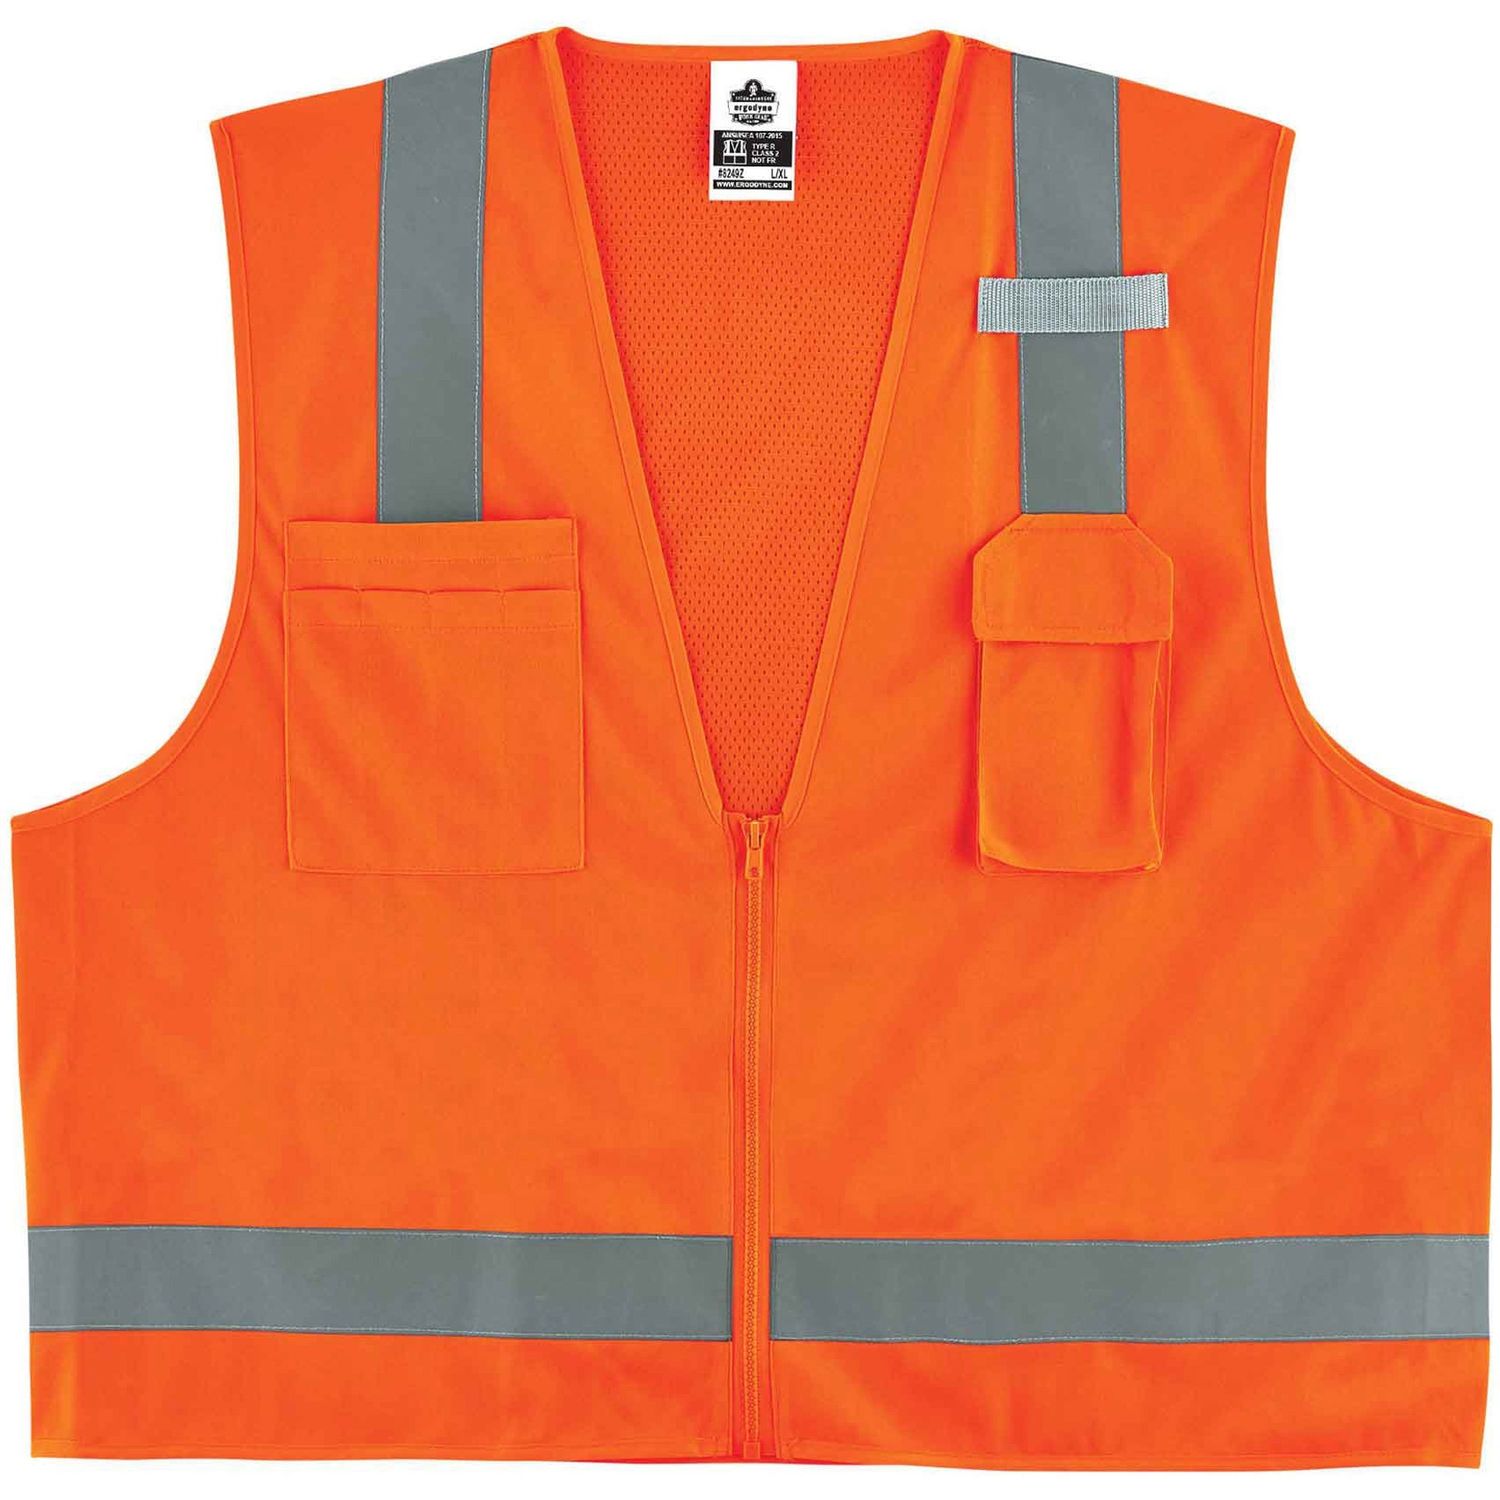 8249Z Type R Class 2 Economy Surveyors Vest Recommended for: Construction, Baggage Handling, Pocket, Mic Tab, Reflective, High Visibility, Breathable, Lightweight, Chest Pocket